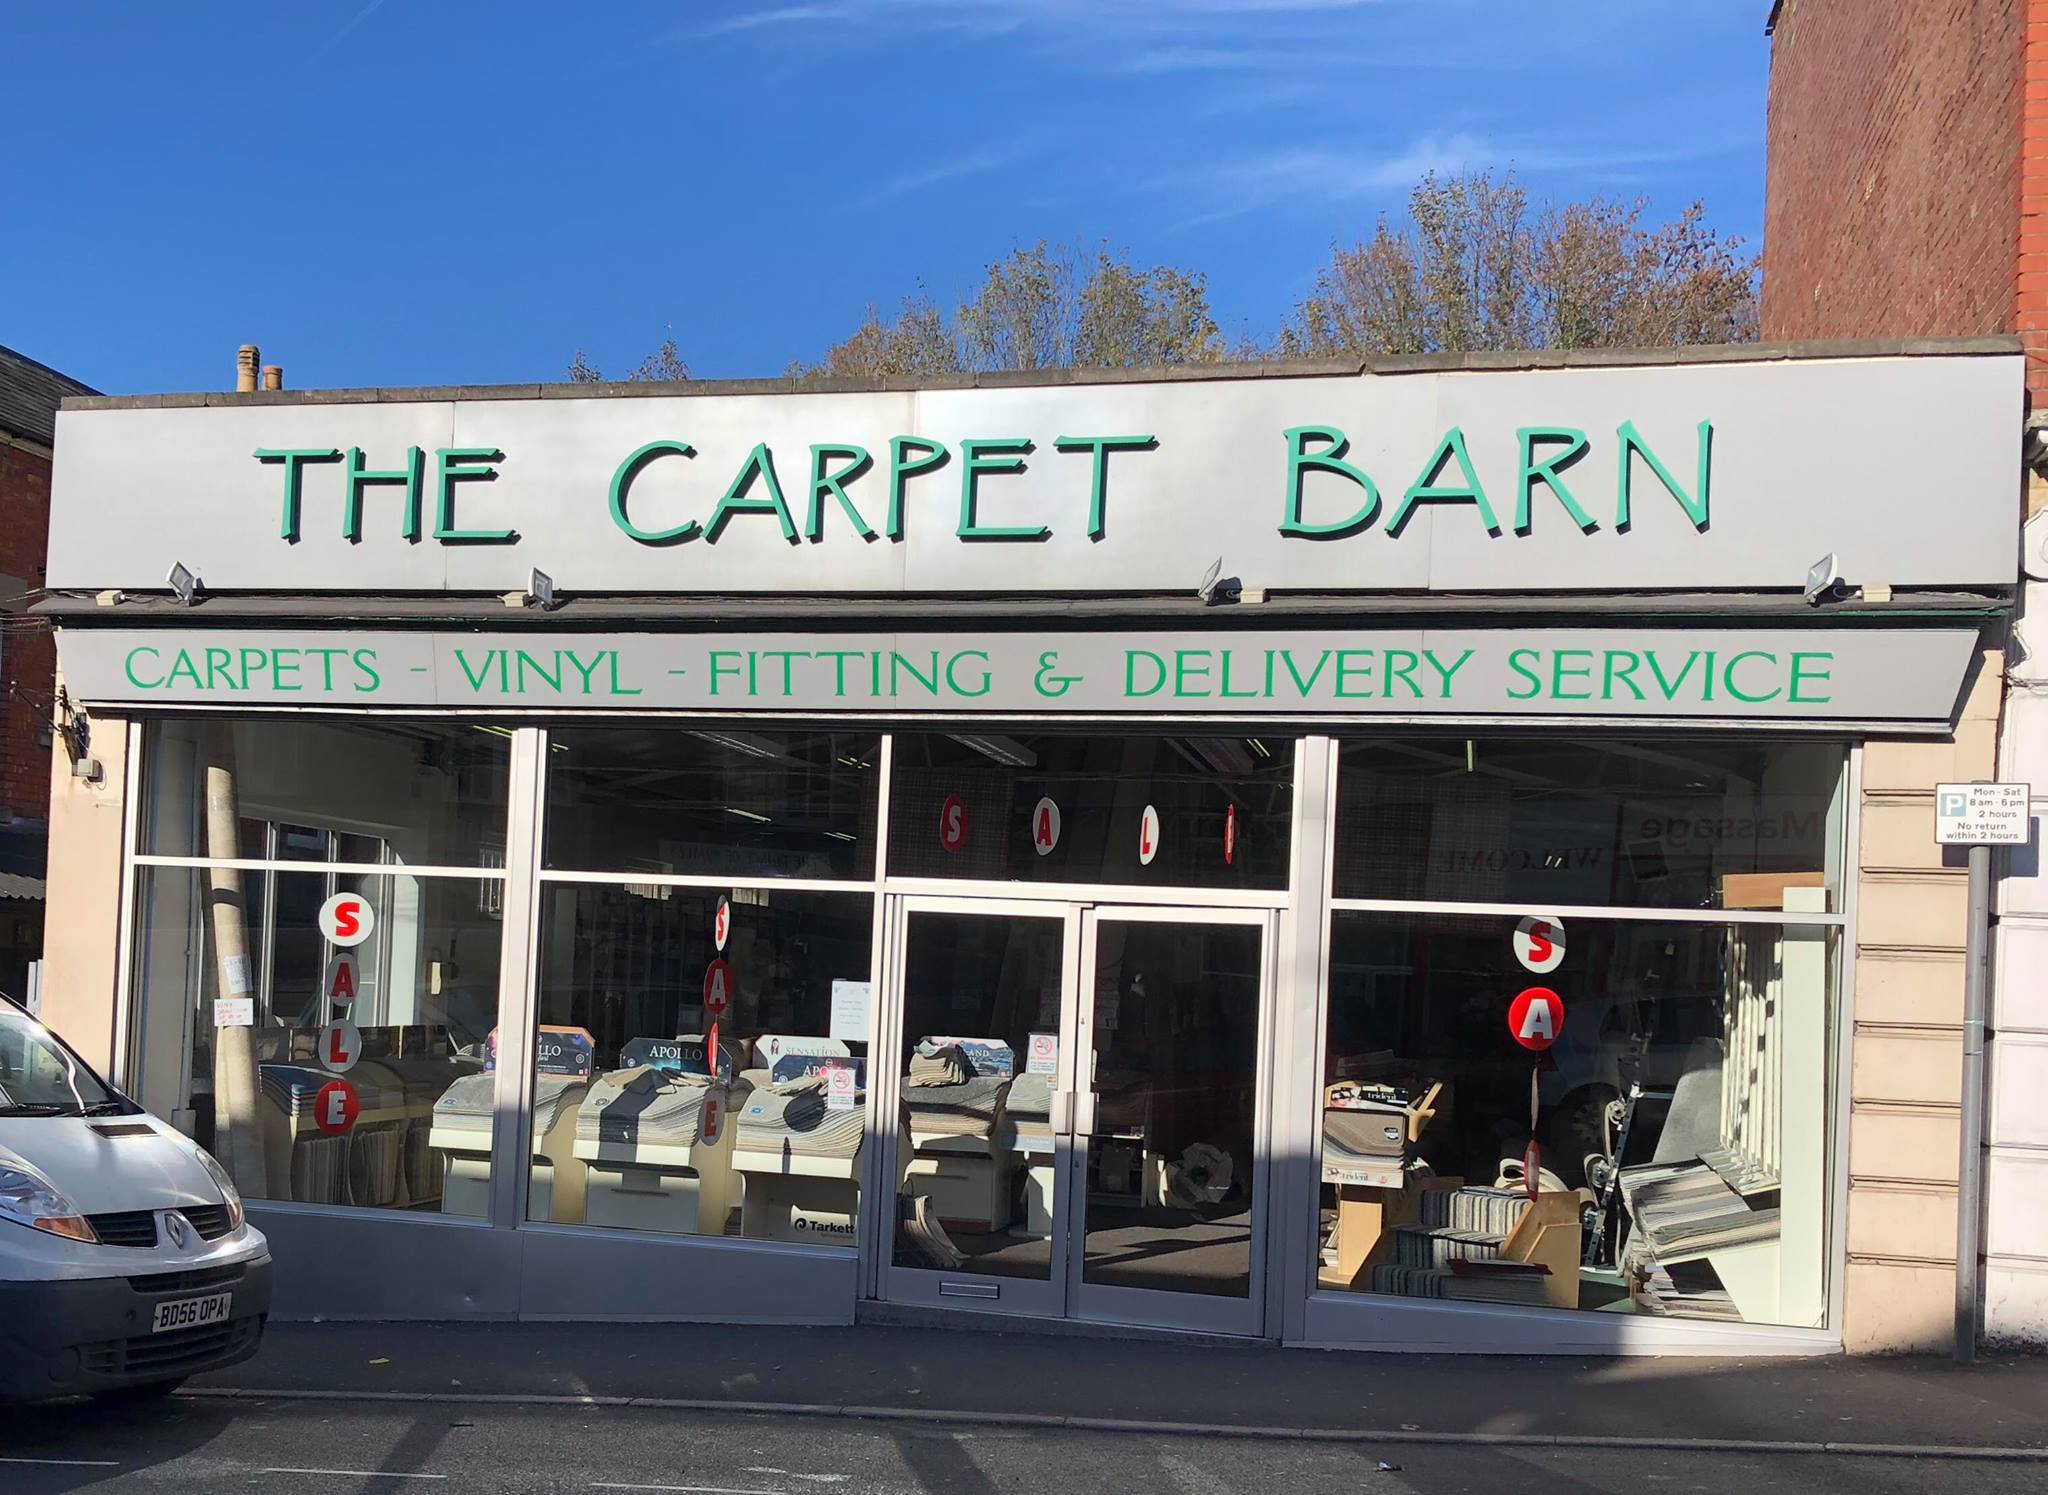 Useful information about carpet barn